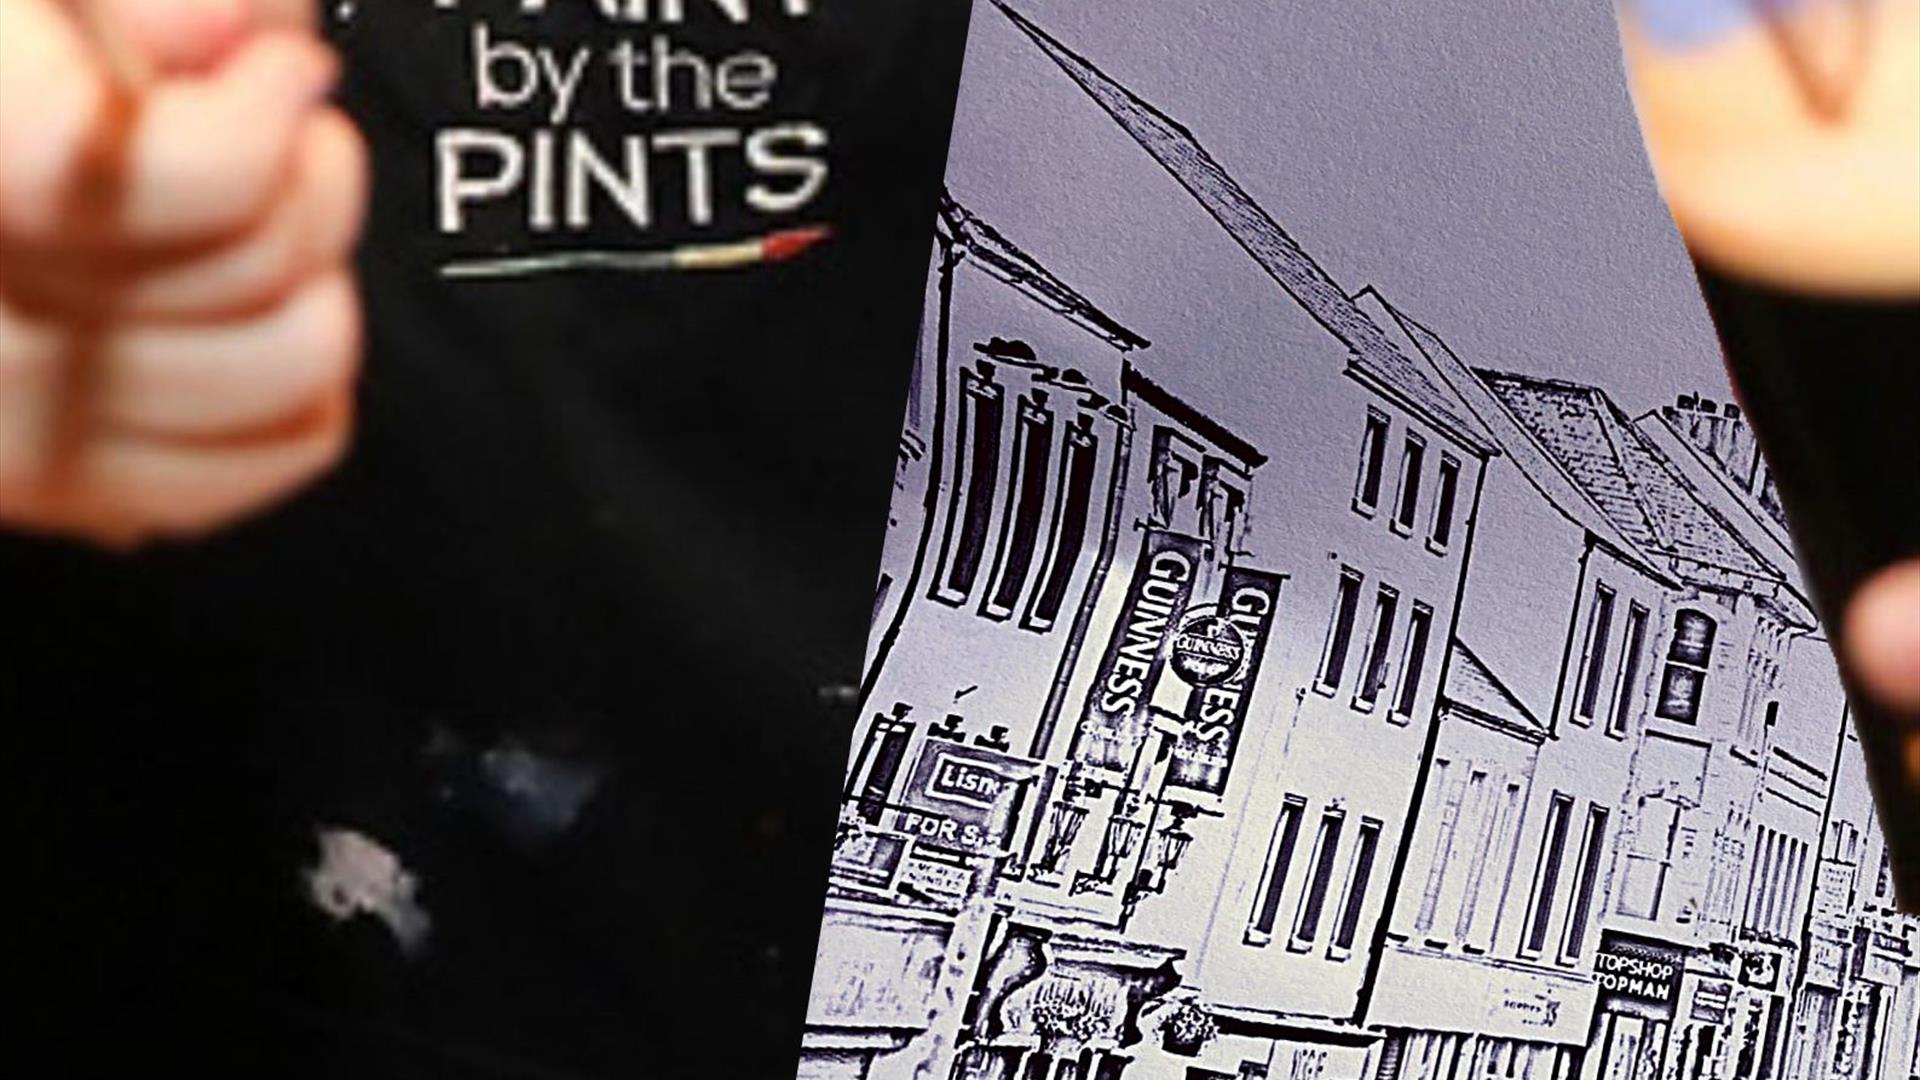 Paint by the Pints Evening on Friday 25th November